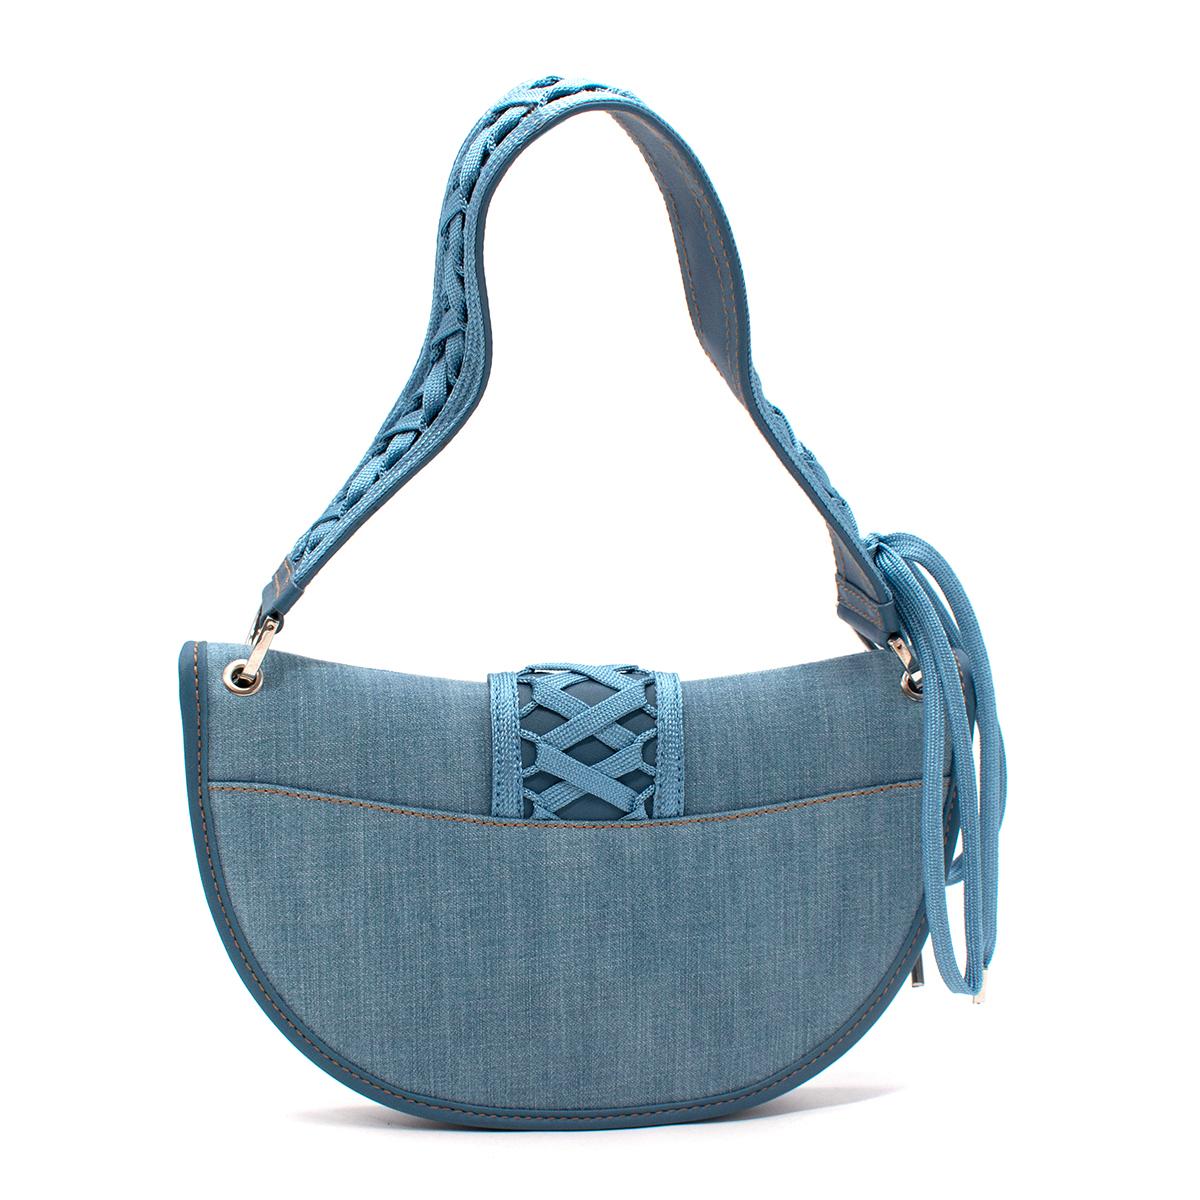 Christian Dior Small Admit It Denim Lace-Up Detail Shoulder Bag 

- 90's style shoulder bag in light denim blue canvas with lace-up detail
- Silver-tone hardware and logo plate
- Matching leather trims with jeans-style stitching
- Wide leather